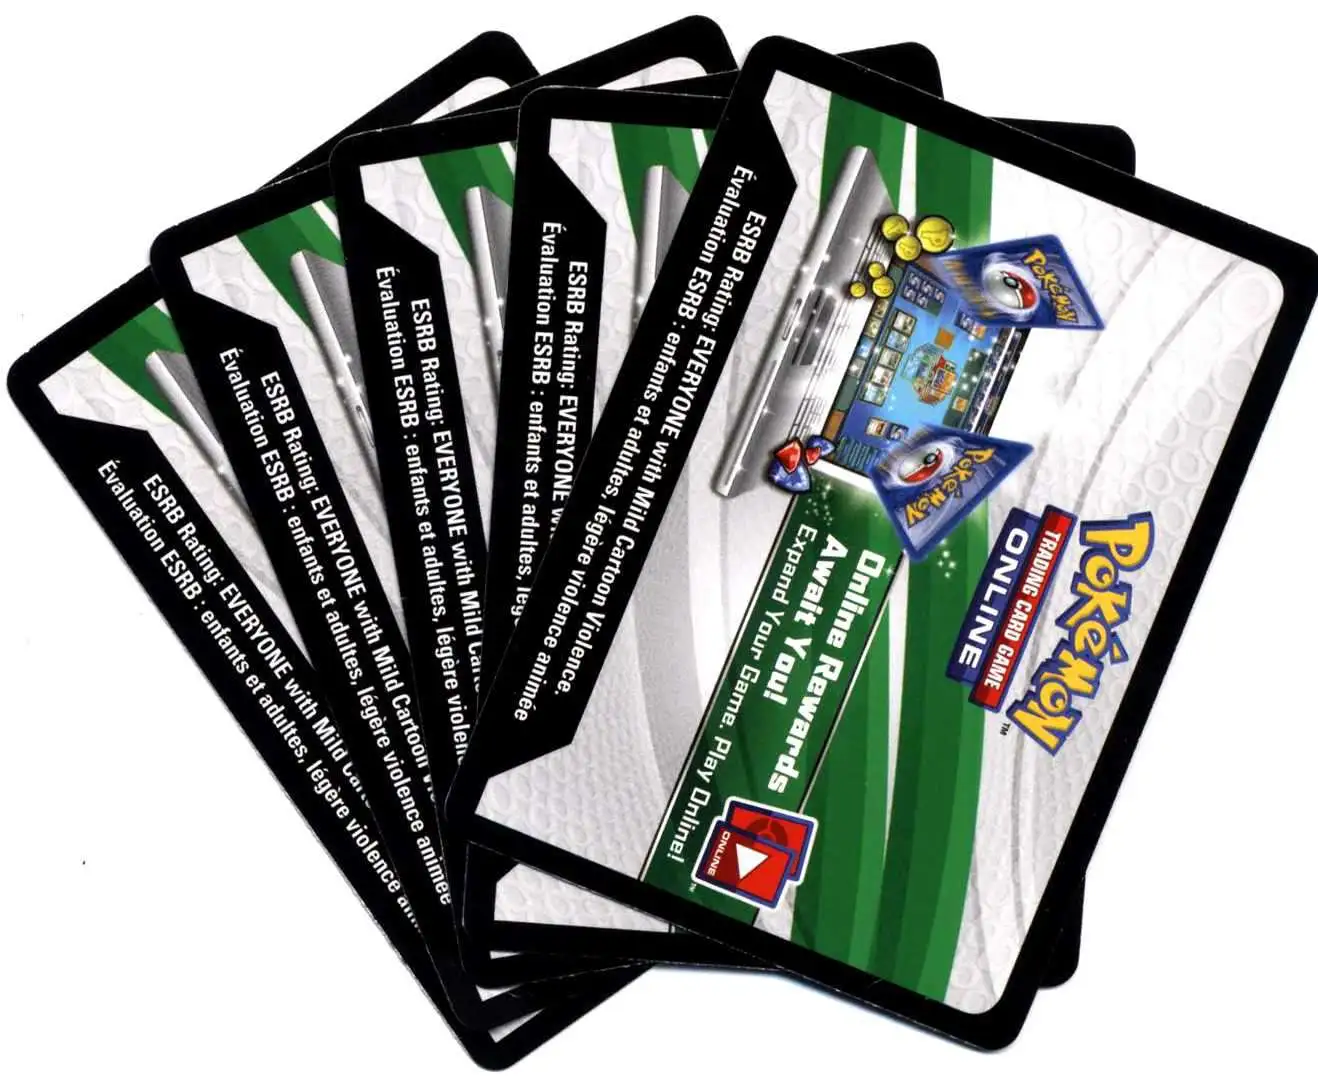 3 x Pokemon "Ancient Origins"  Booster Pack Online Code Cards TCGO Unused 